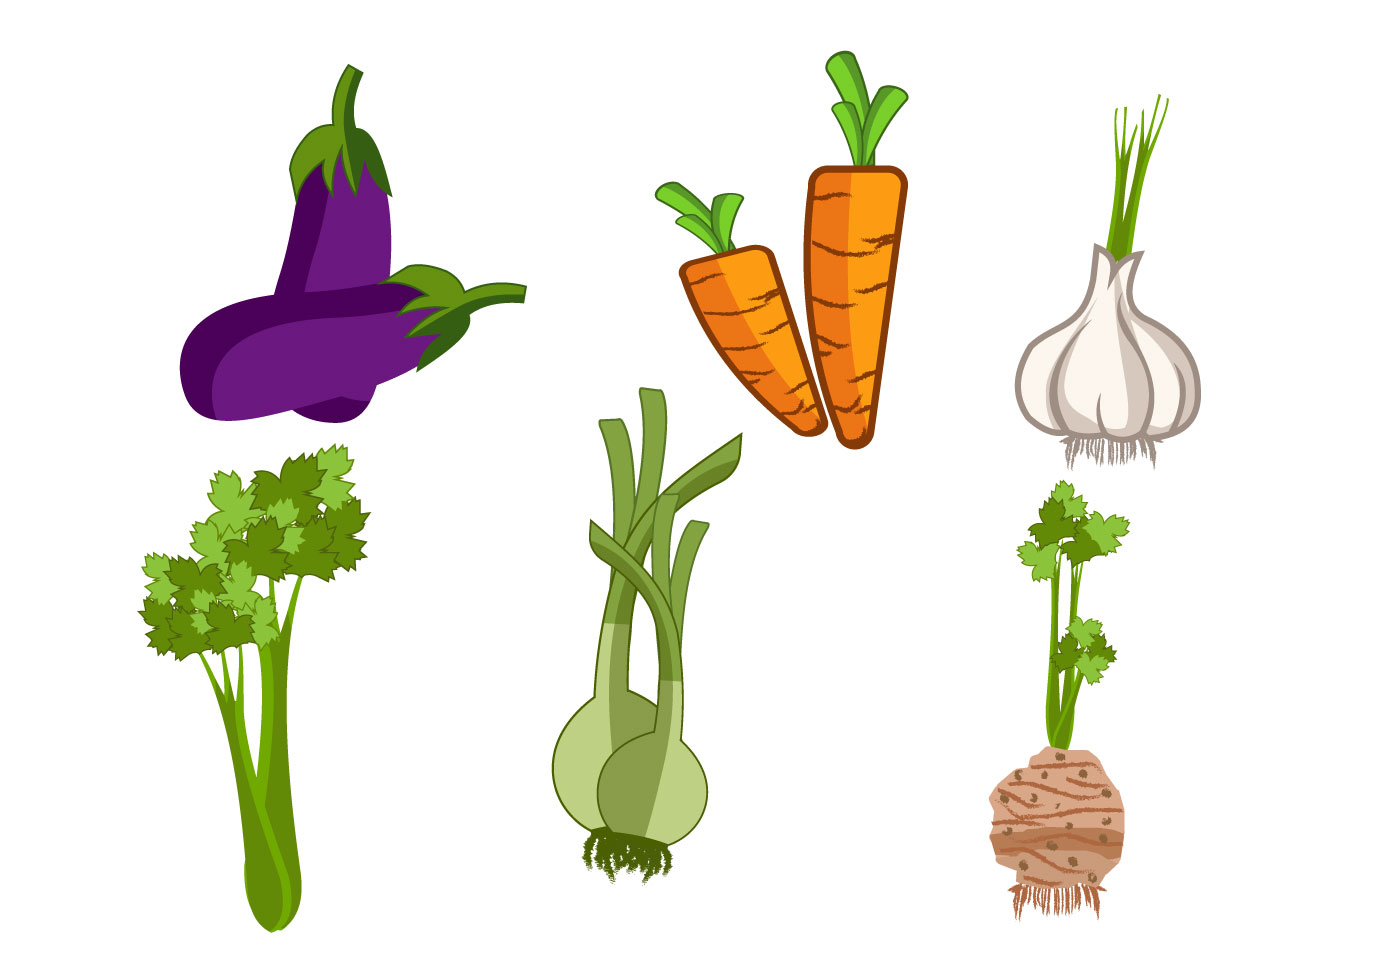 Isolated Vegetables & Herb Vector - Download Free Vector ...